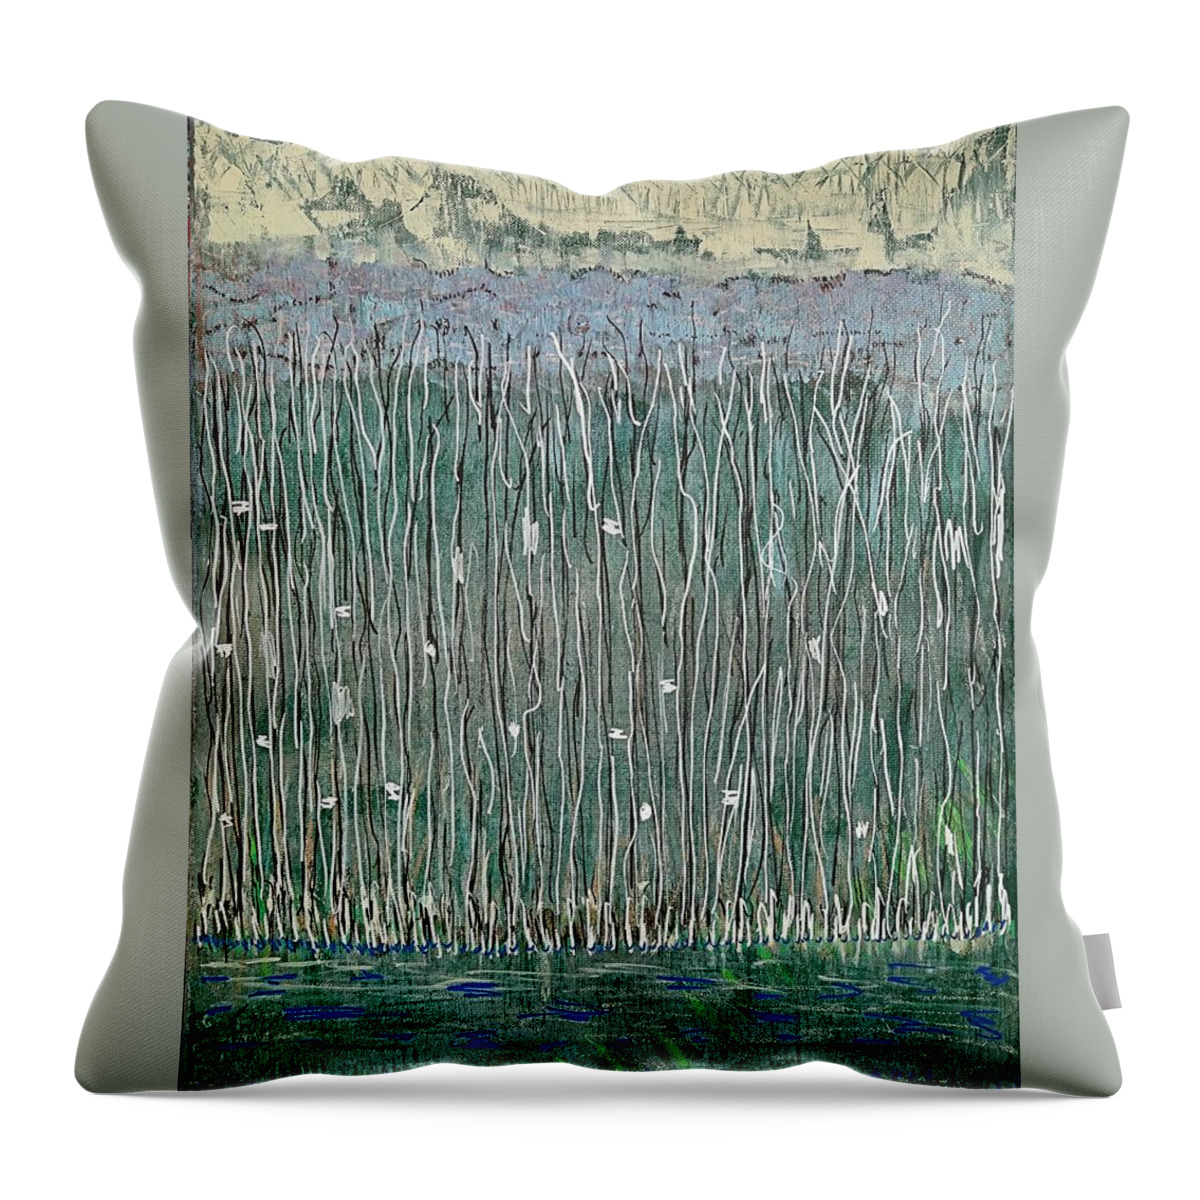 Colorado Throw Pillow featuring the painting Thru the Grasses by Pam O'Mara